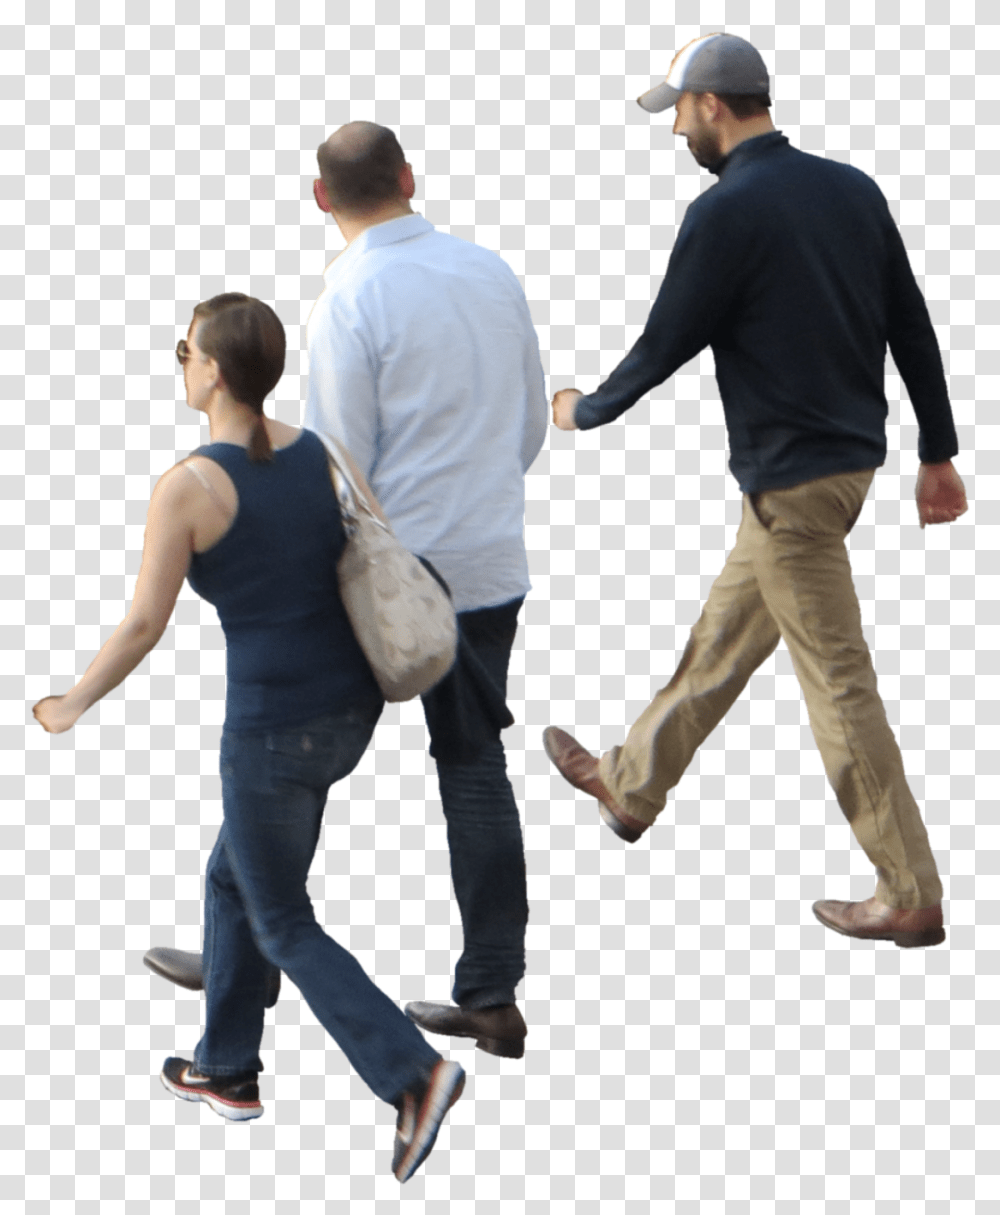 People Walking Away Images In Group People Walking, Person, Clothing, Hand, Pants Transparent Png